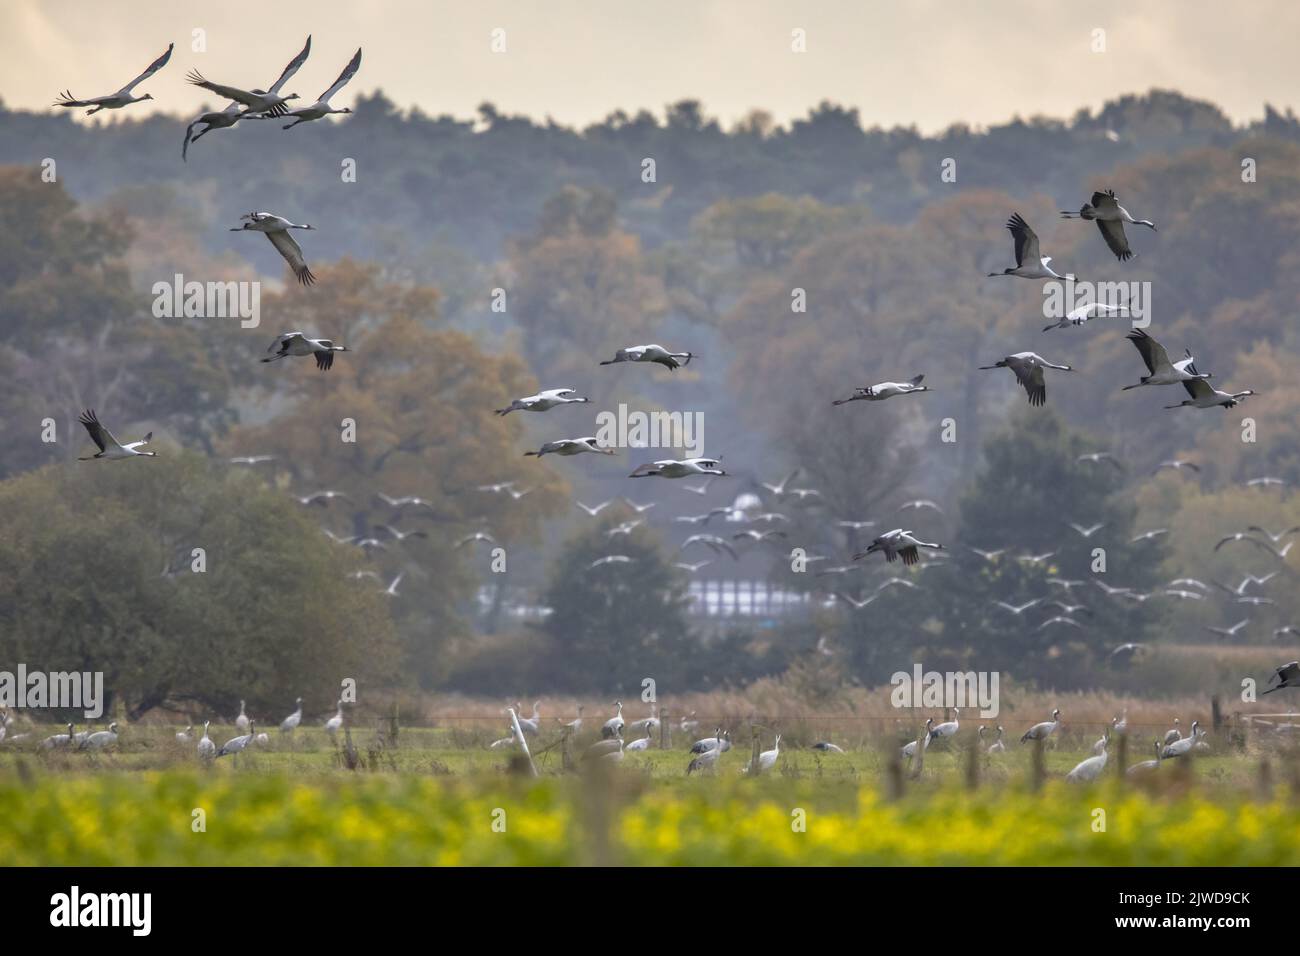 Groups of Common Crane (Grus grus) birds on migration in feeding habitat on German Countryside in October. Germany Stock Photo